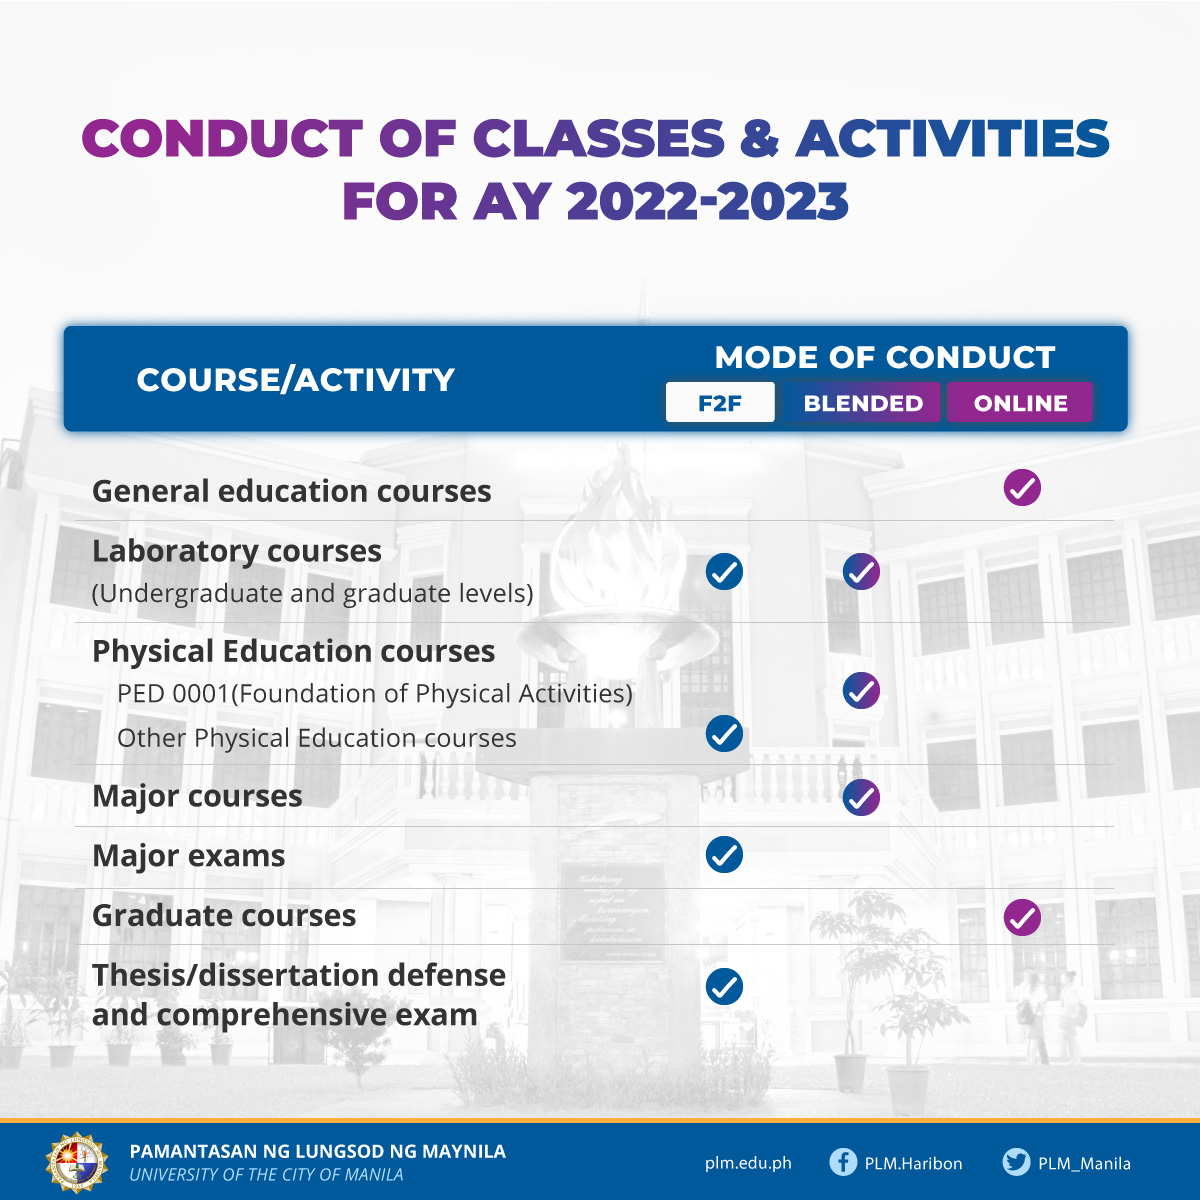 Advisory: Conduct of classes and activities for Academic Year 2022-2023